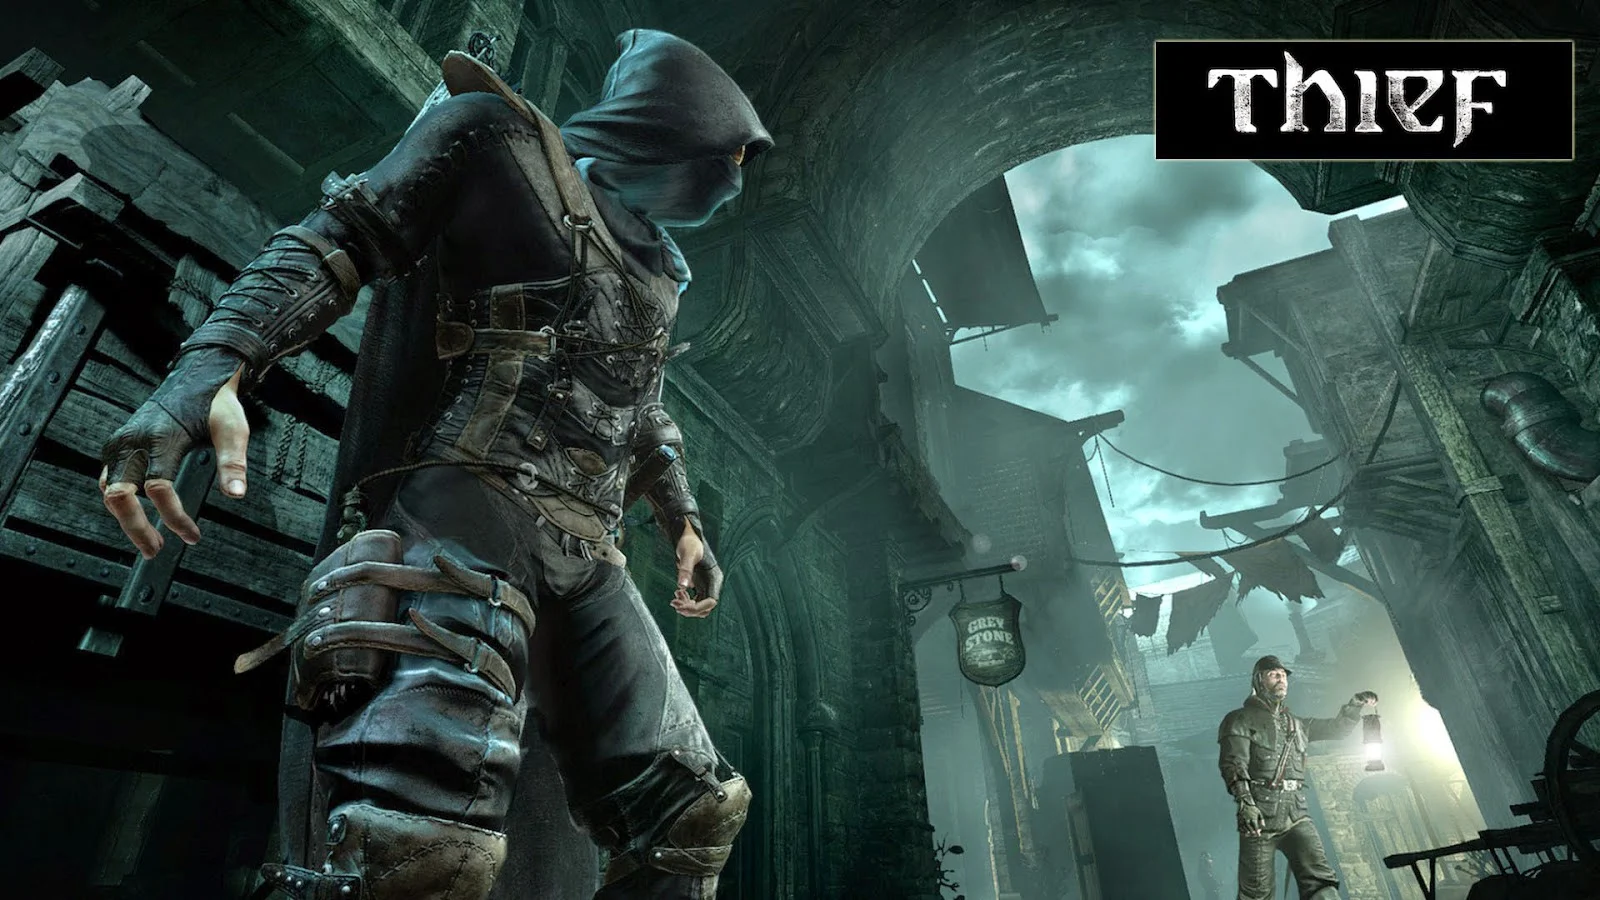 THIEF FULL PC GAME DOWNLOAD